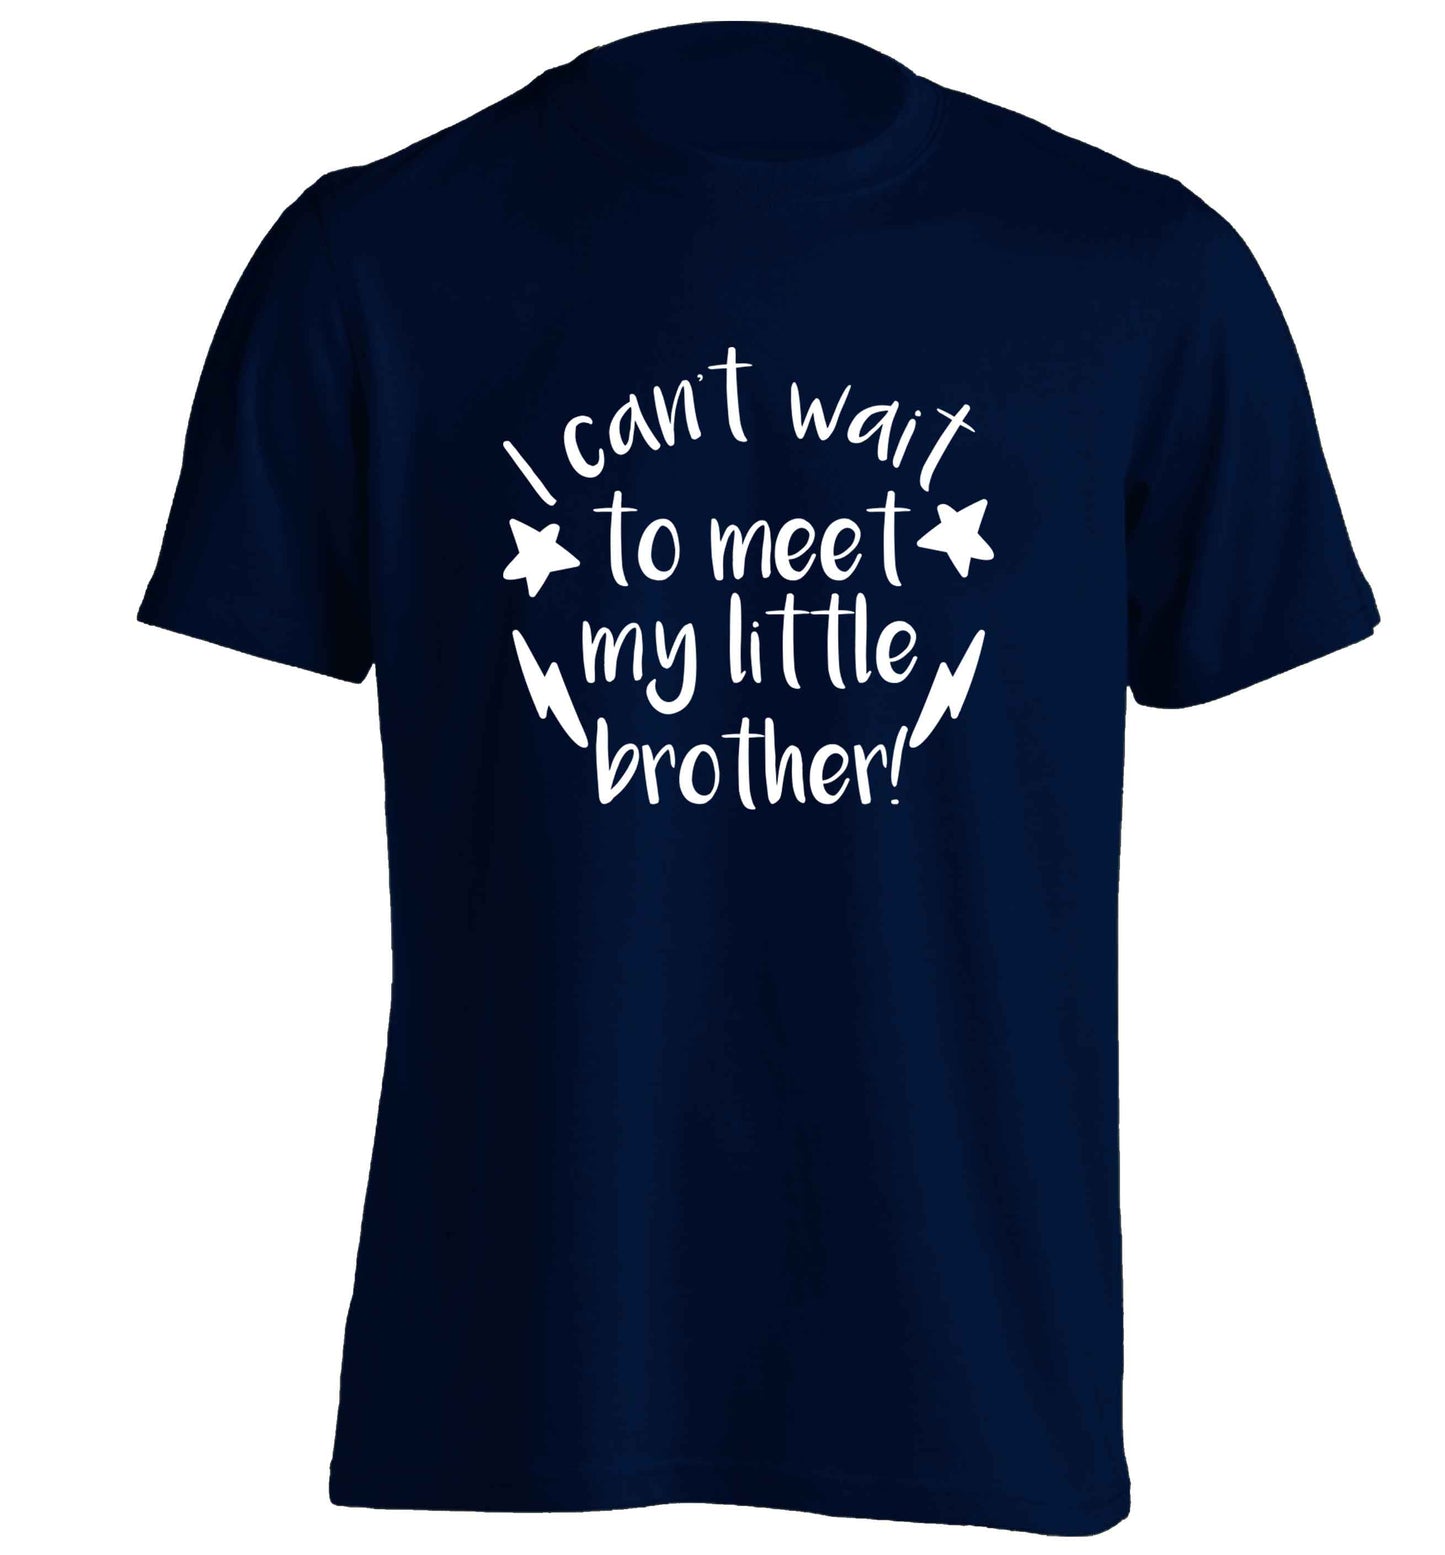 I can't wait to meet my sister! adults unisex navy Tshirt 2XL